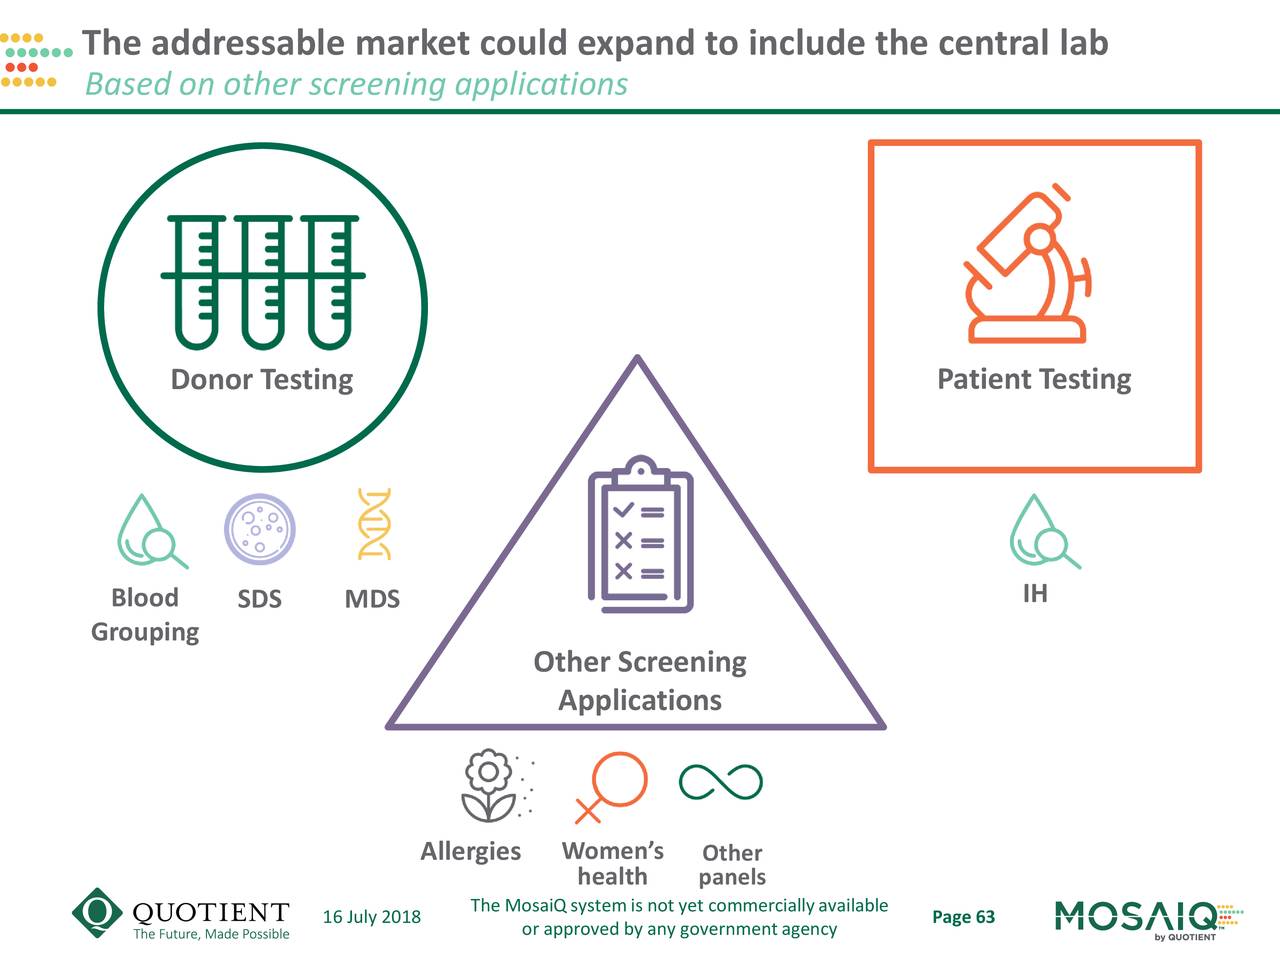 The addressable market could expand to include the central lab